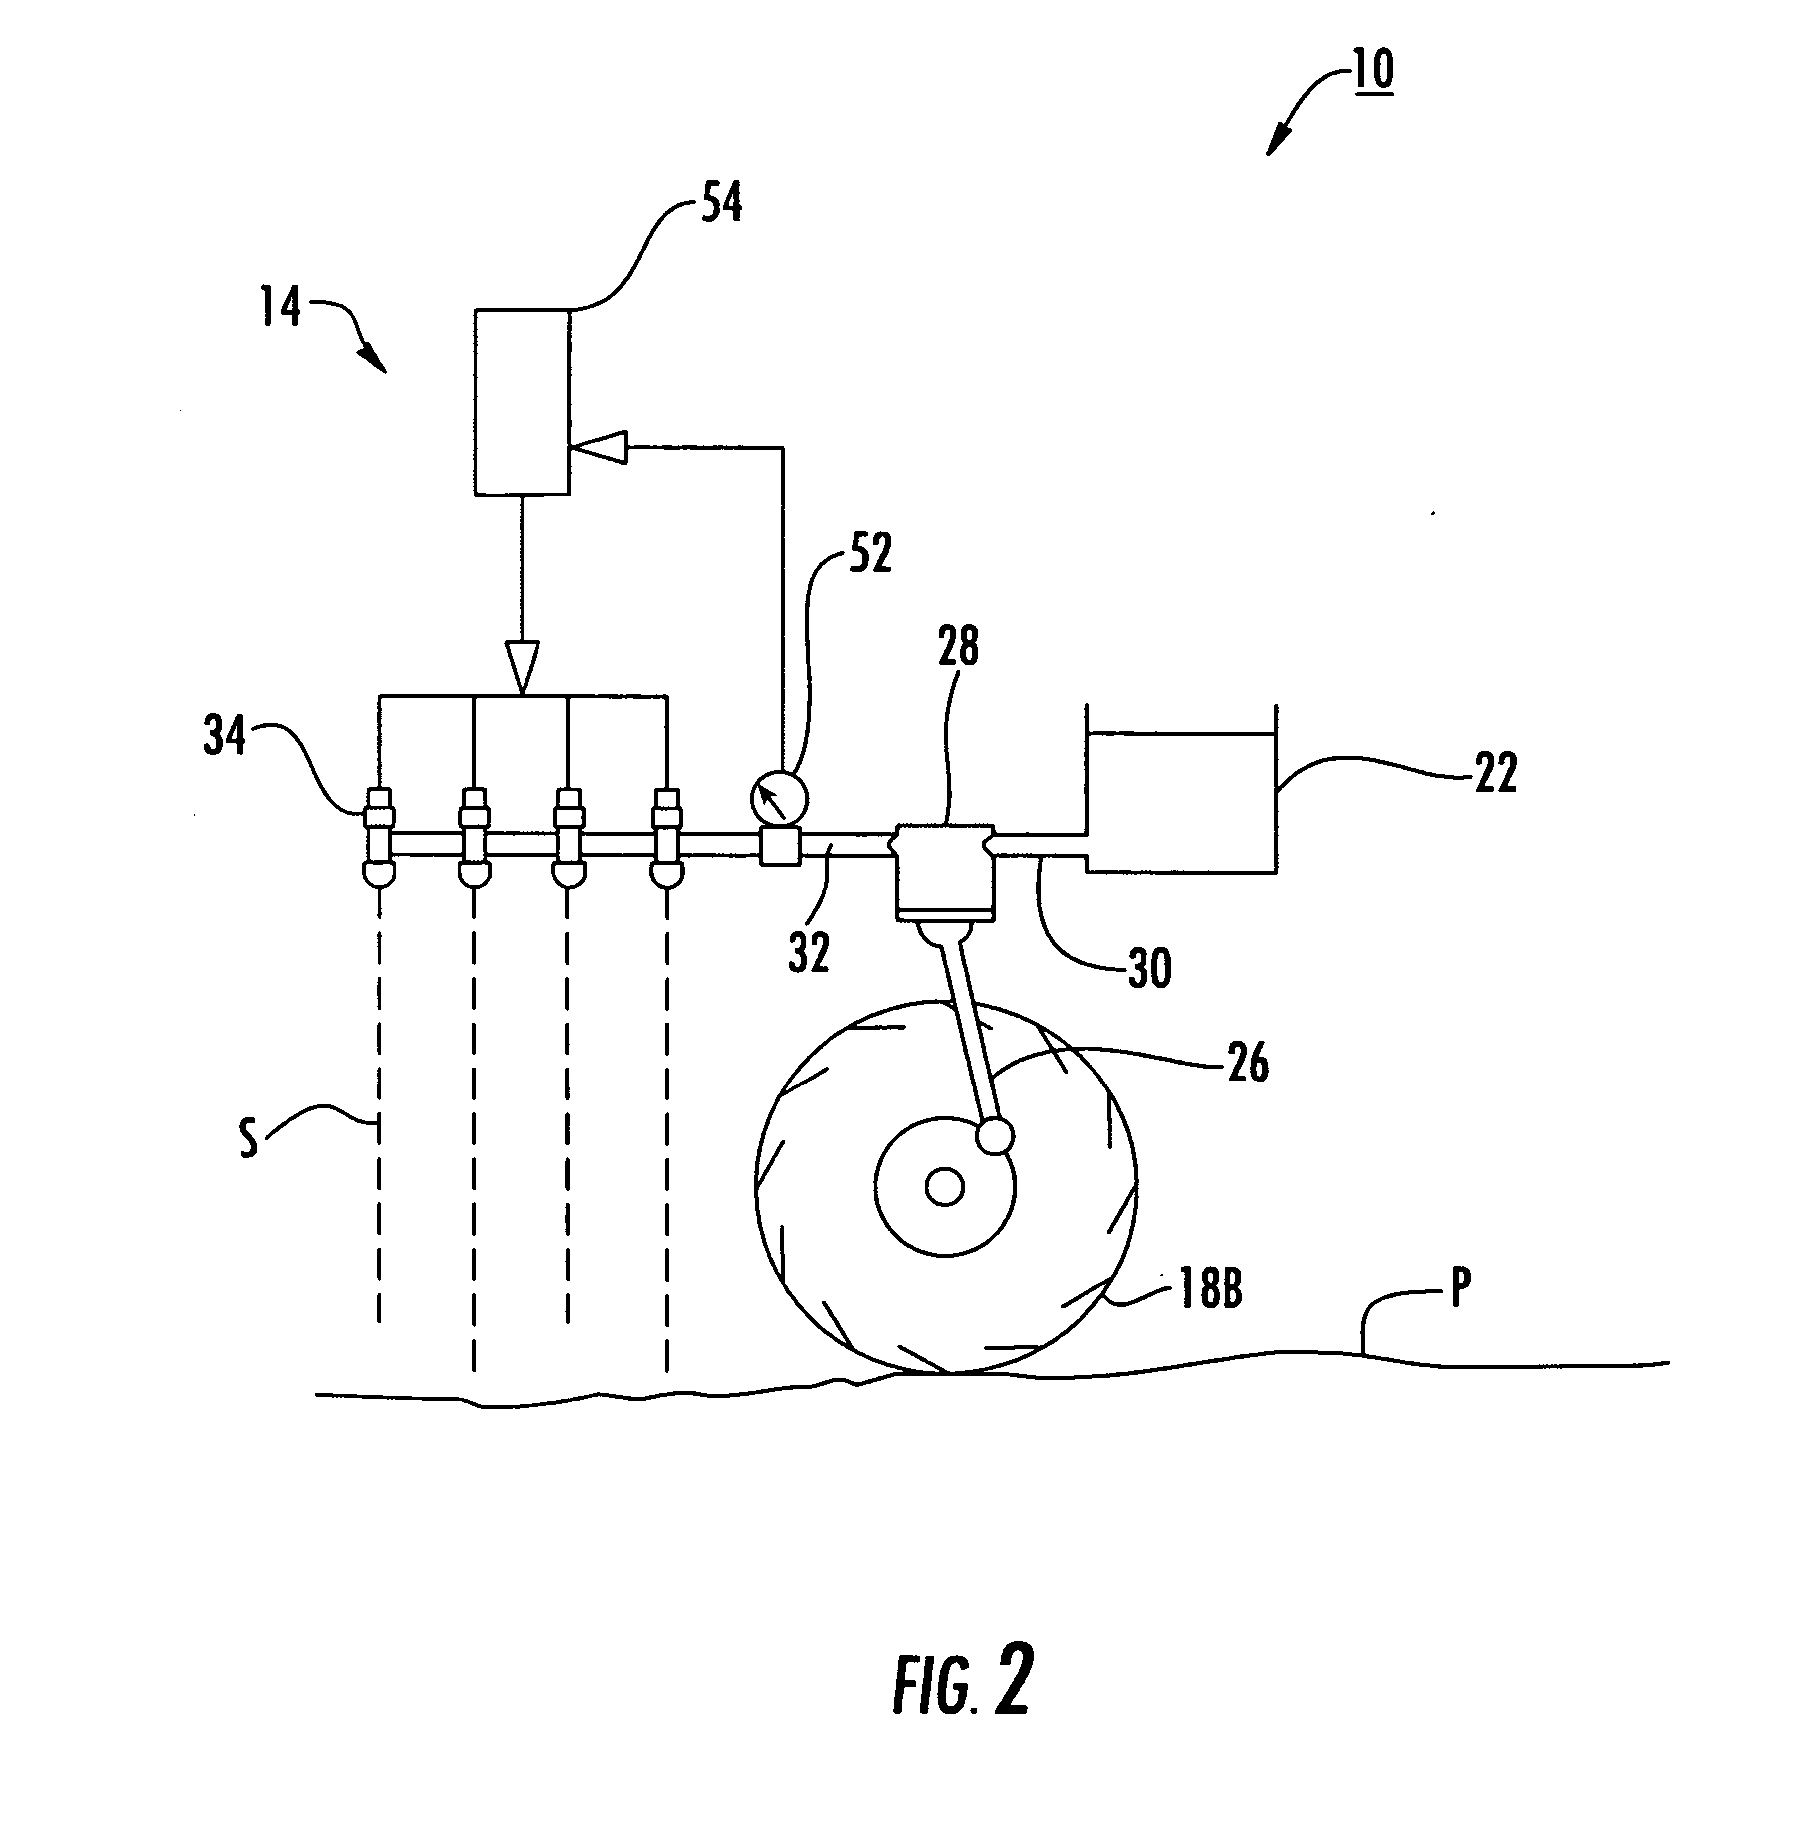 Electrically actuated variable pressure control system